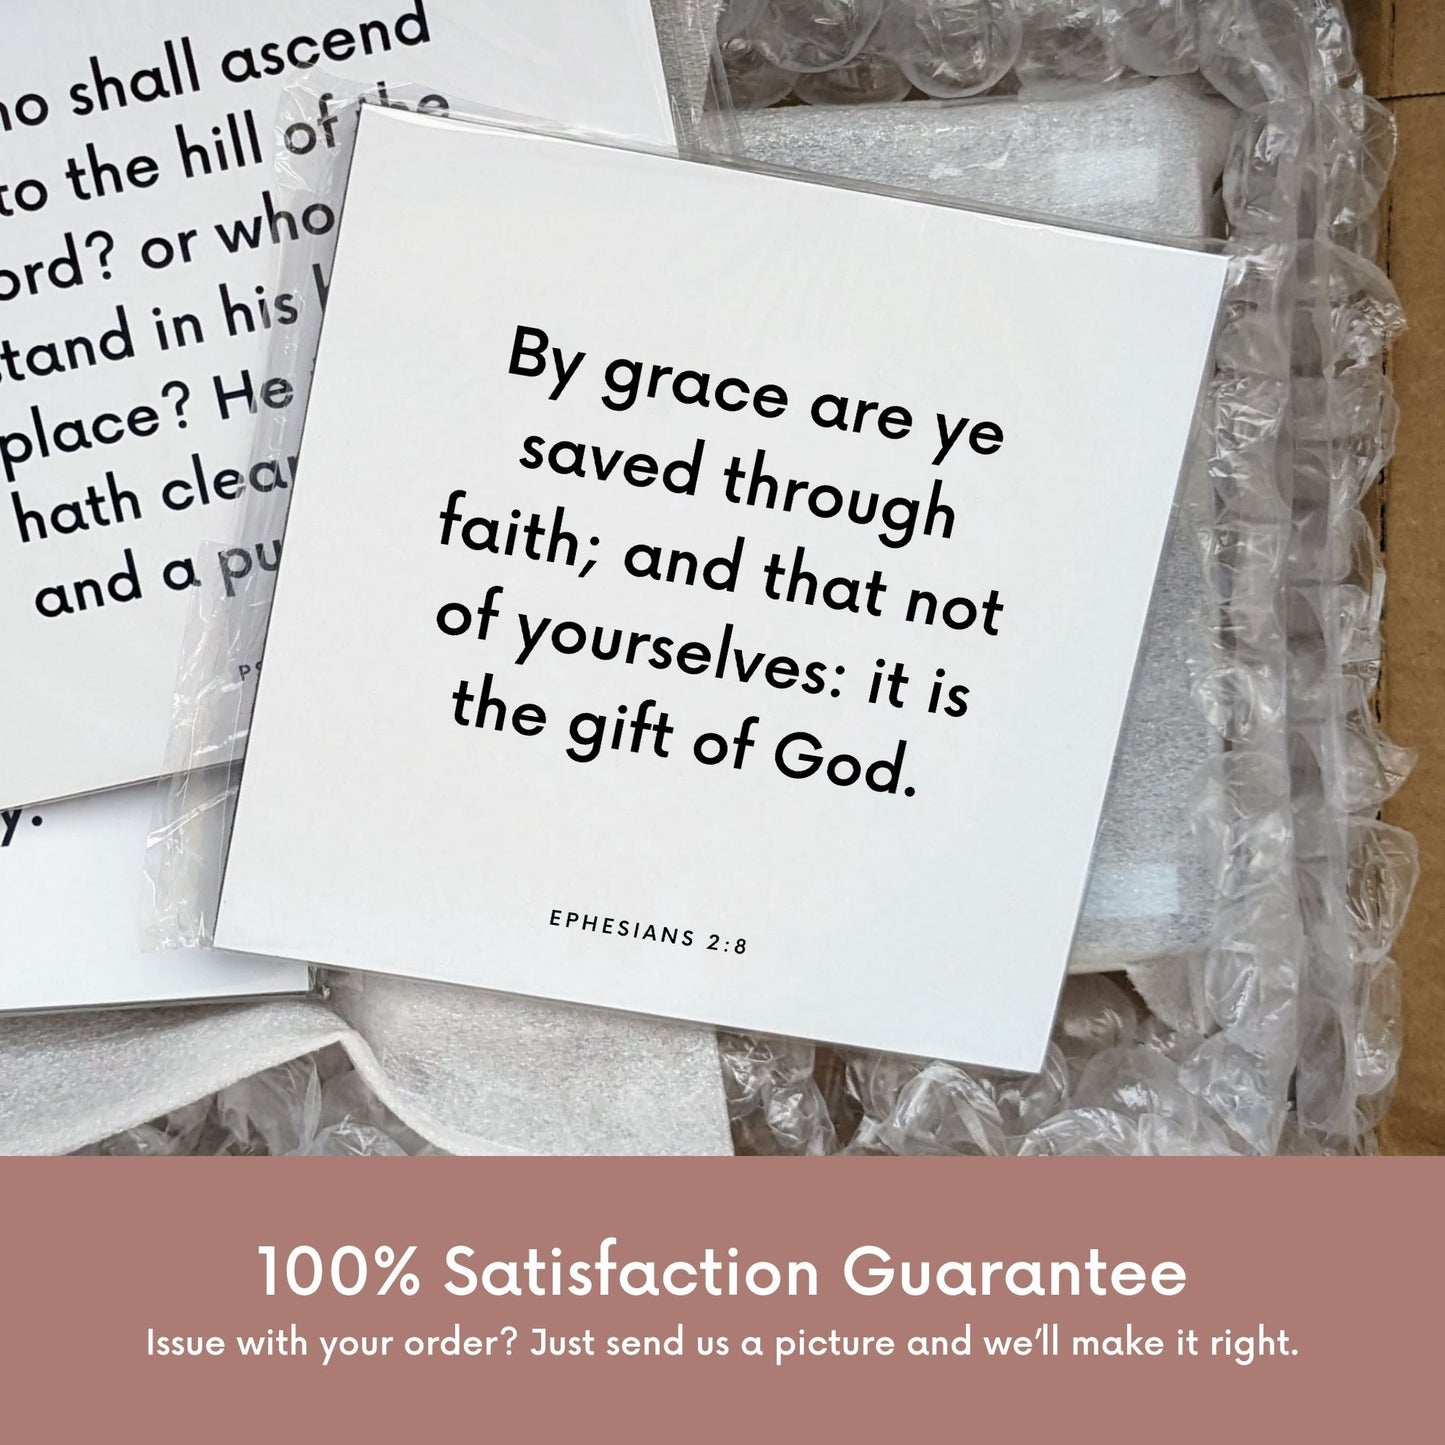 Shipping materials for scripture tile of Ephesians 2:8 - "By grace are ye saved through faith"